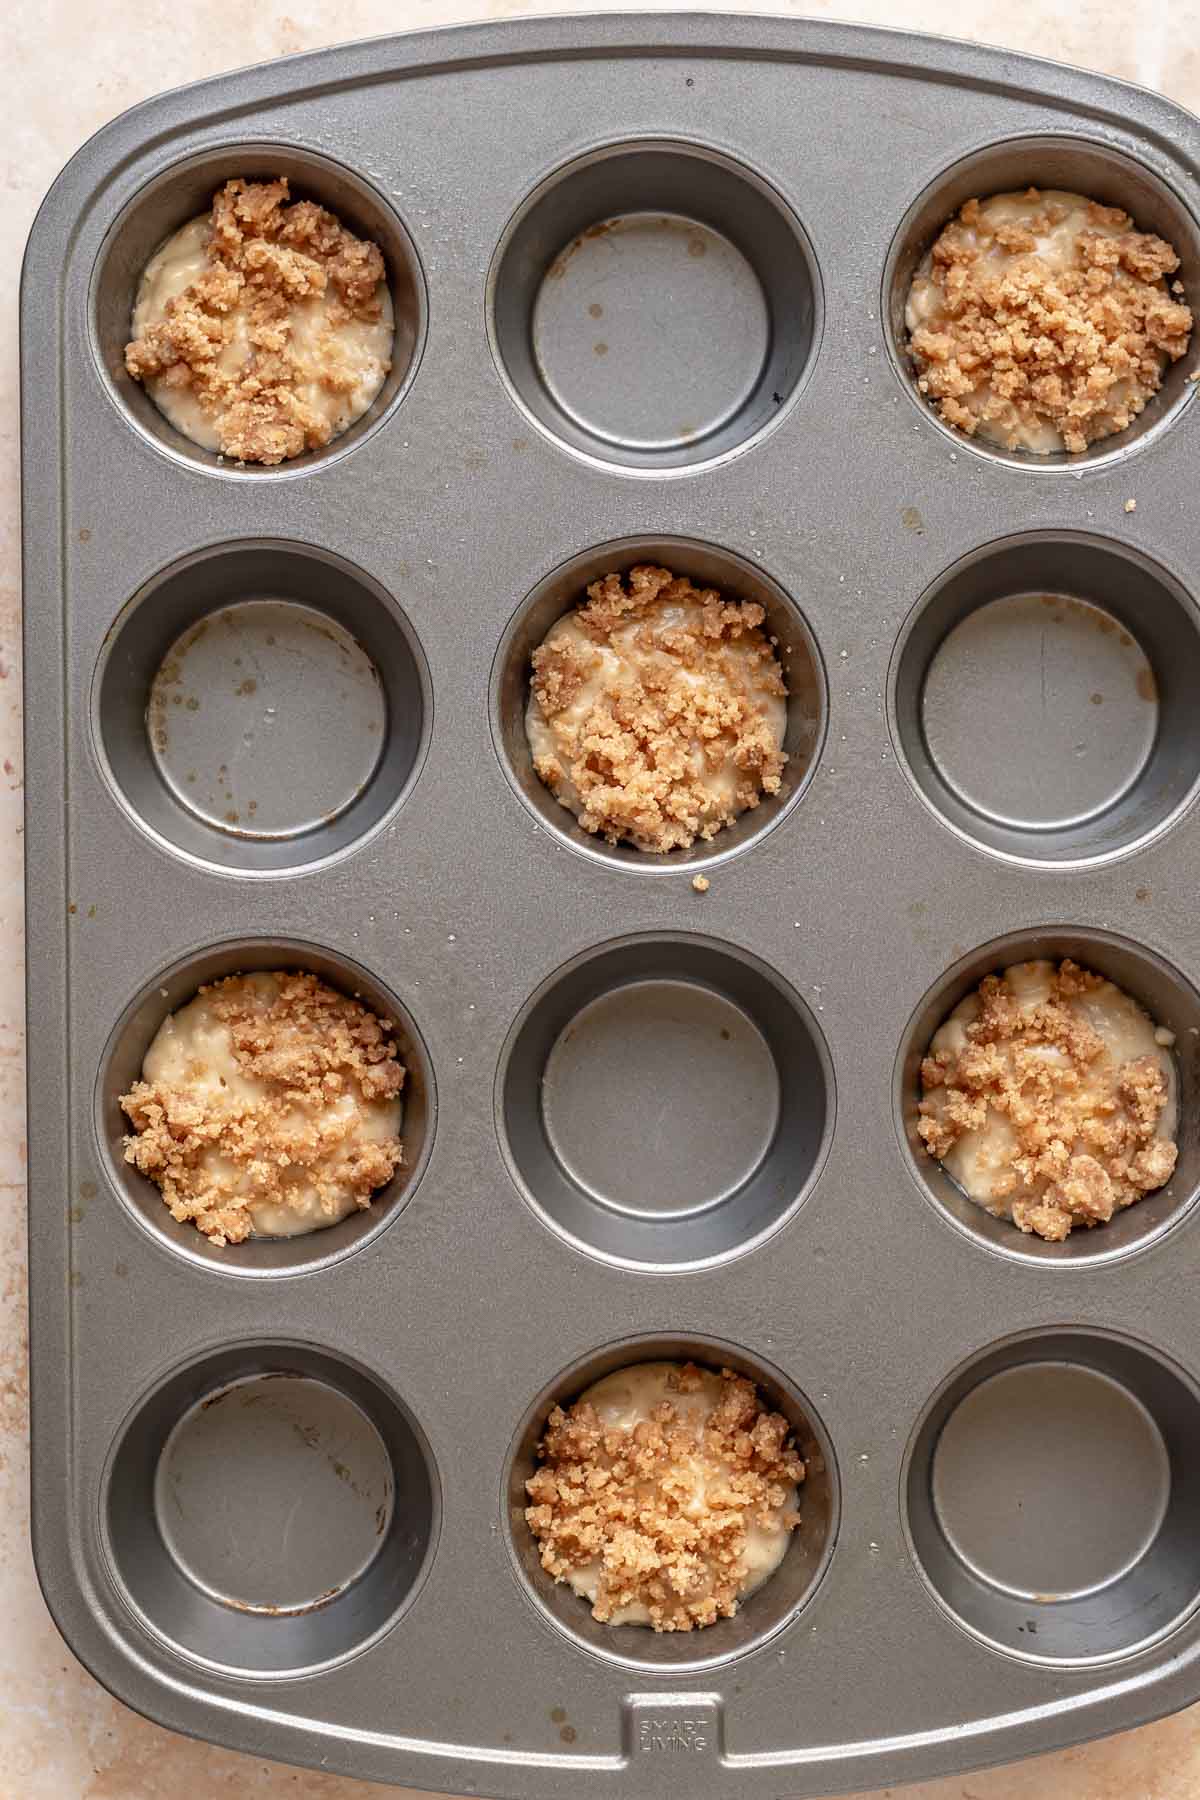 Streusel on top of muffin batter in a muffin tin.